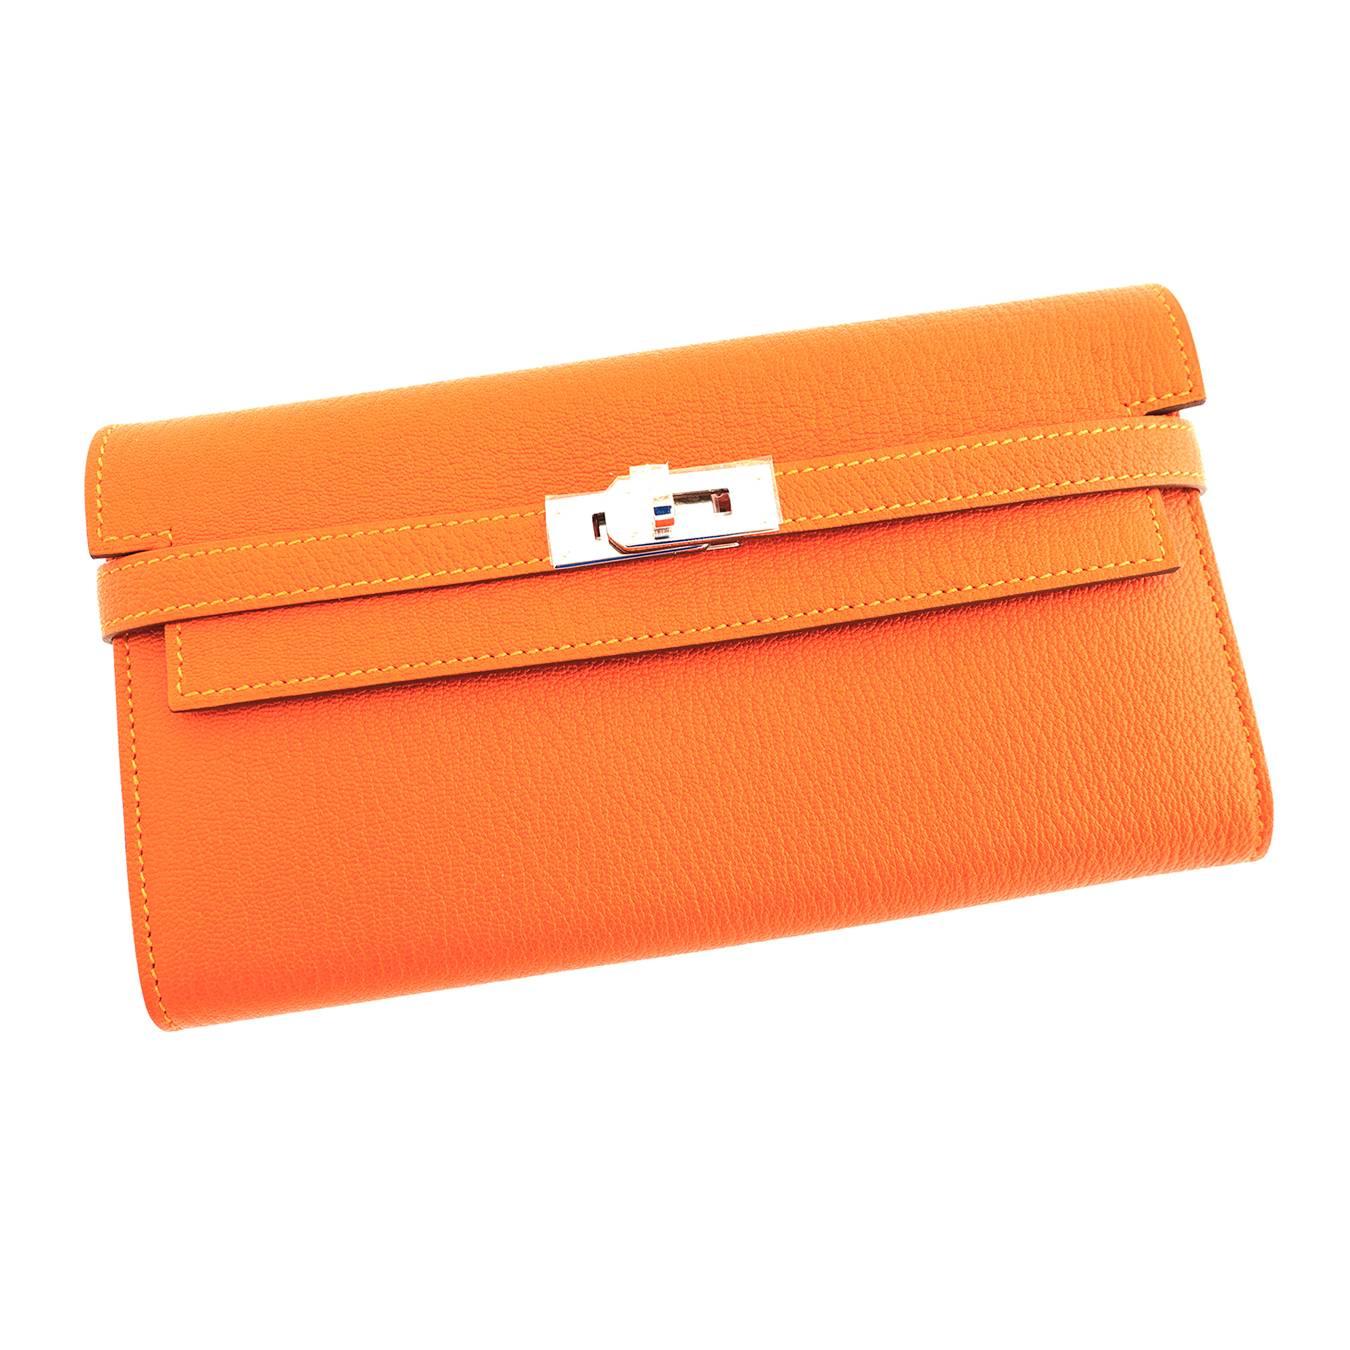 Store fresh. Pristine Condition. 
Perfect gift!  Coming full set with Hermes box and ribbon. 
Gift bag available upon request! 
Feu Orange is a gorgeous orange 
So luxurious in Chevre skin with a slight sheen
A lifetime piece with the iconic